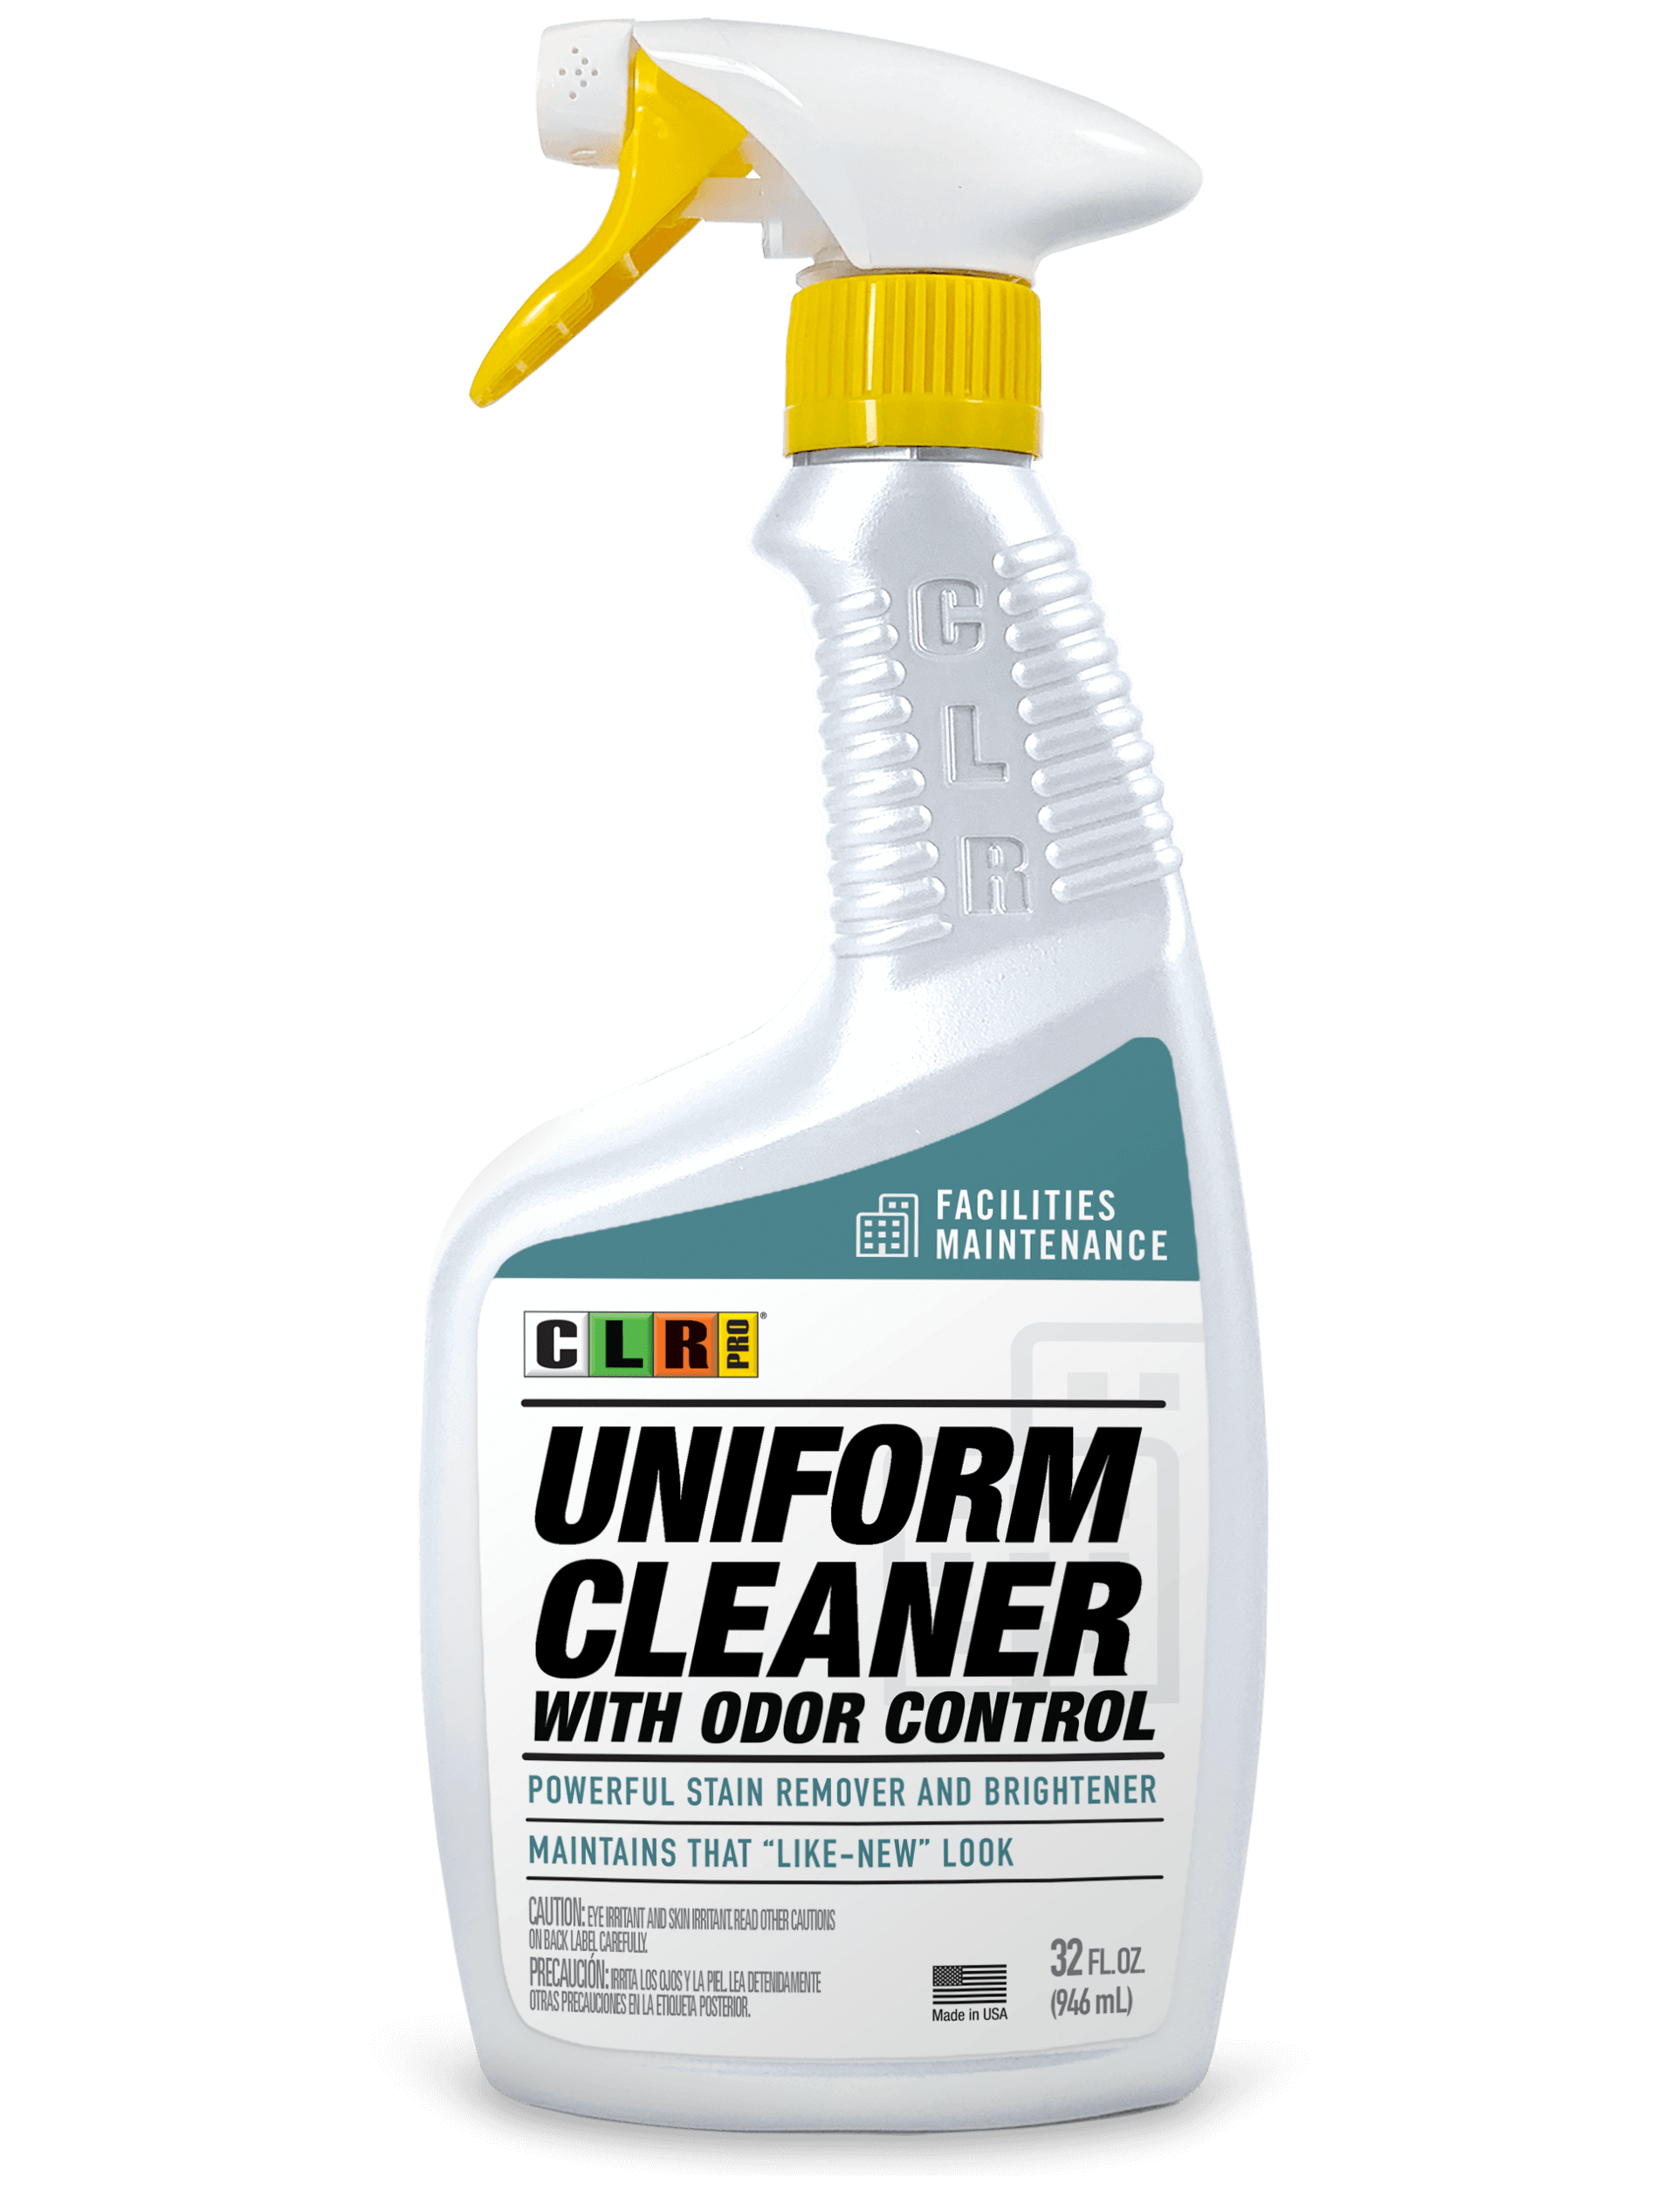 CLR PRO<sup>&reg;</sup> Uniform Cleaner with Odor Control package